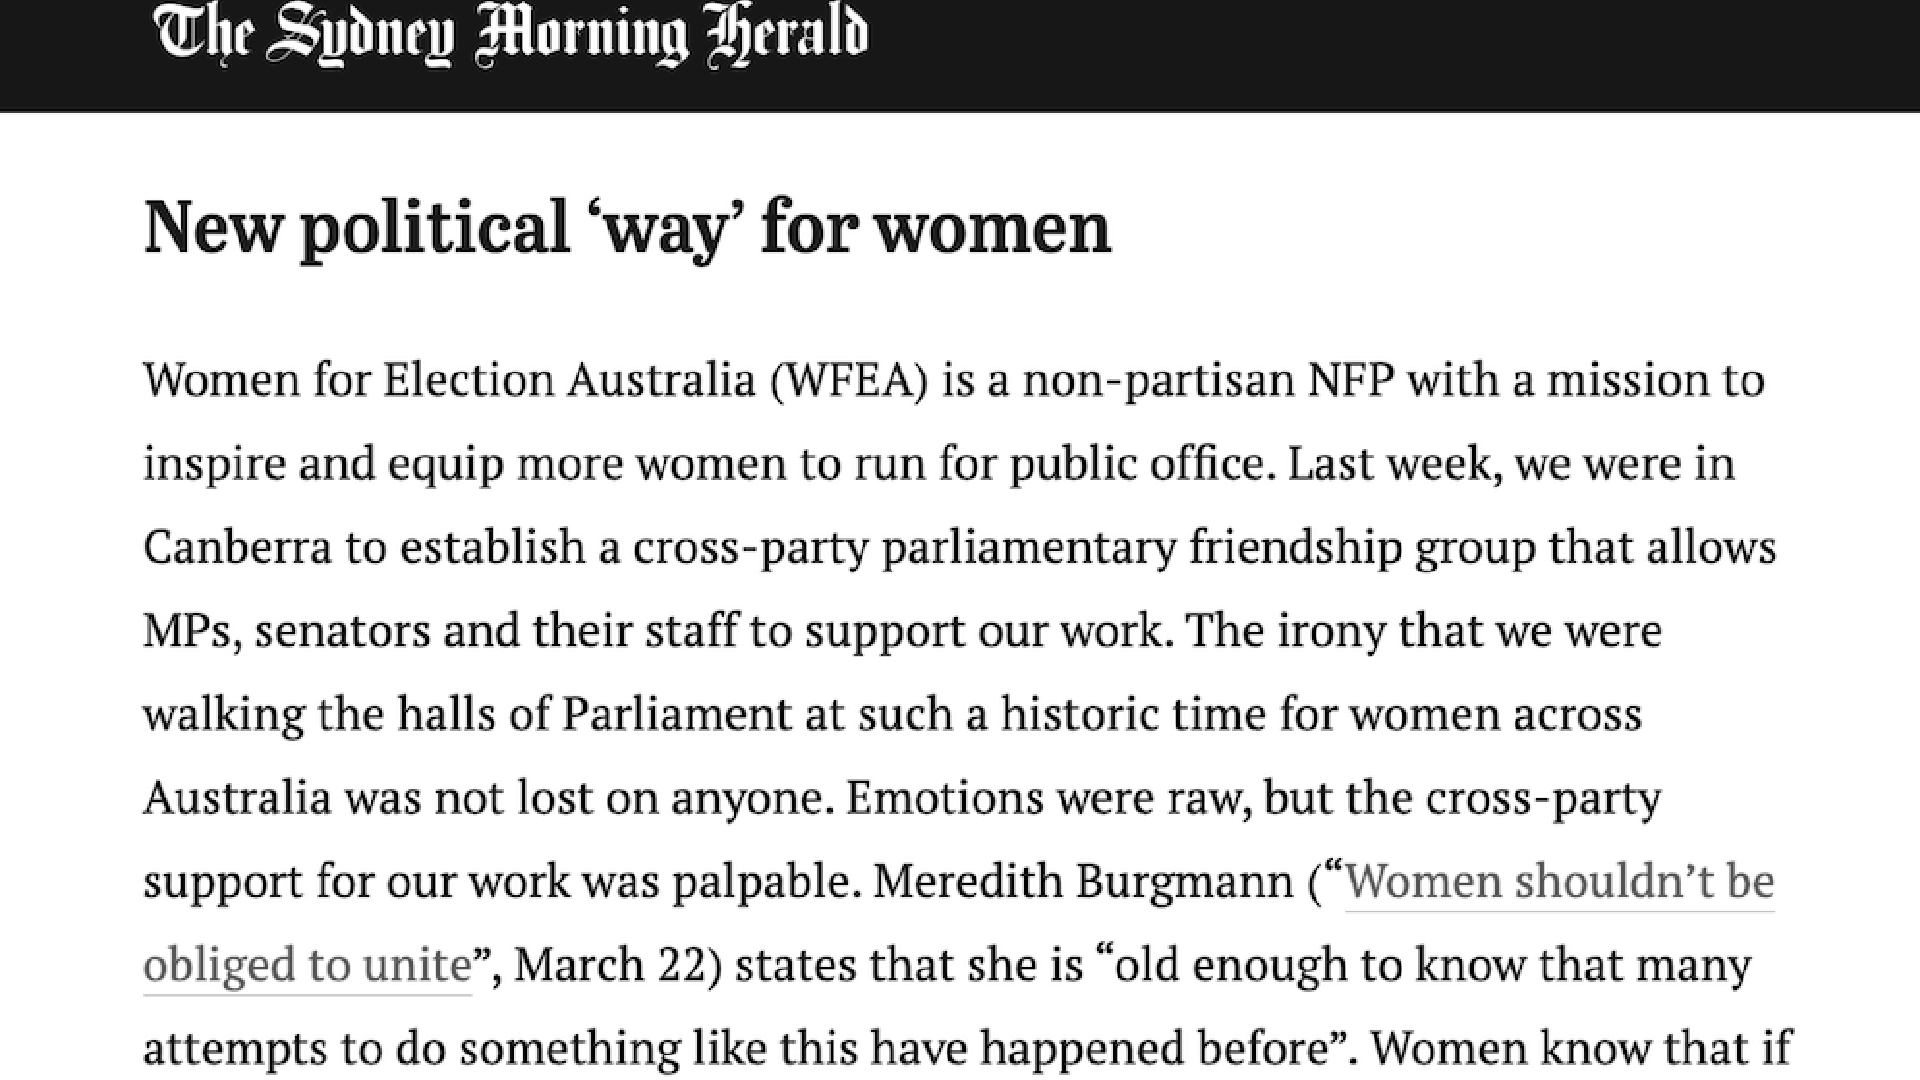 Women for Election: New Political Way for Women